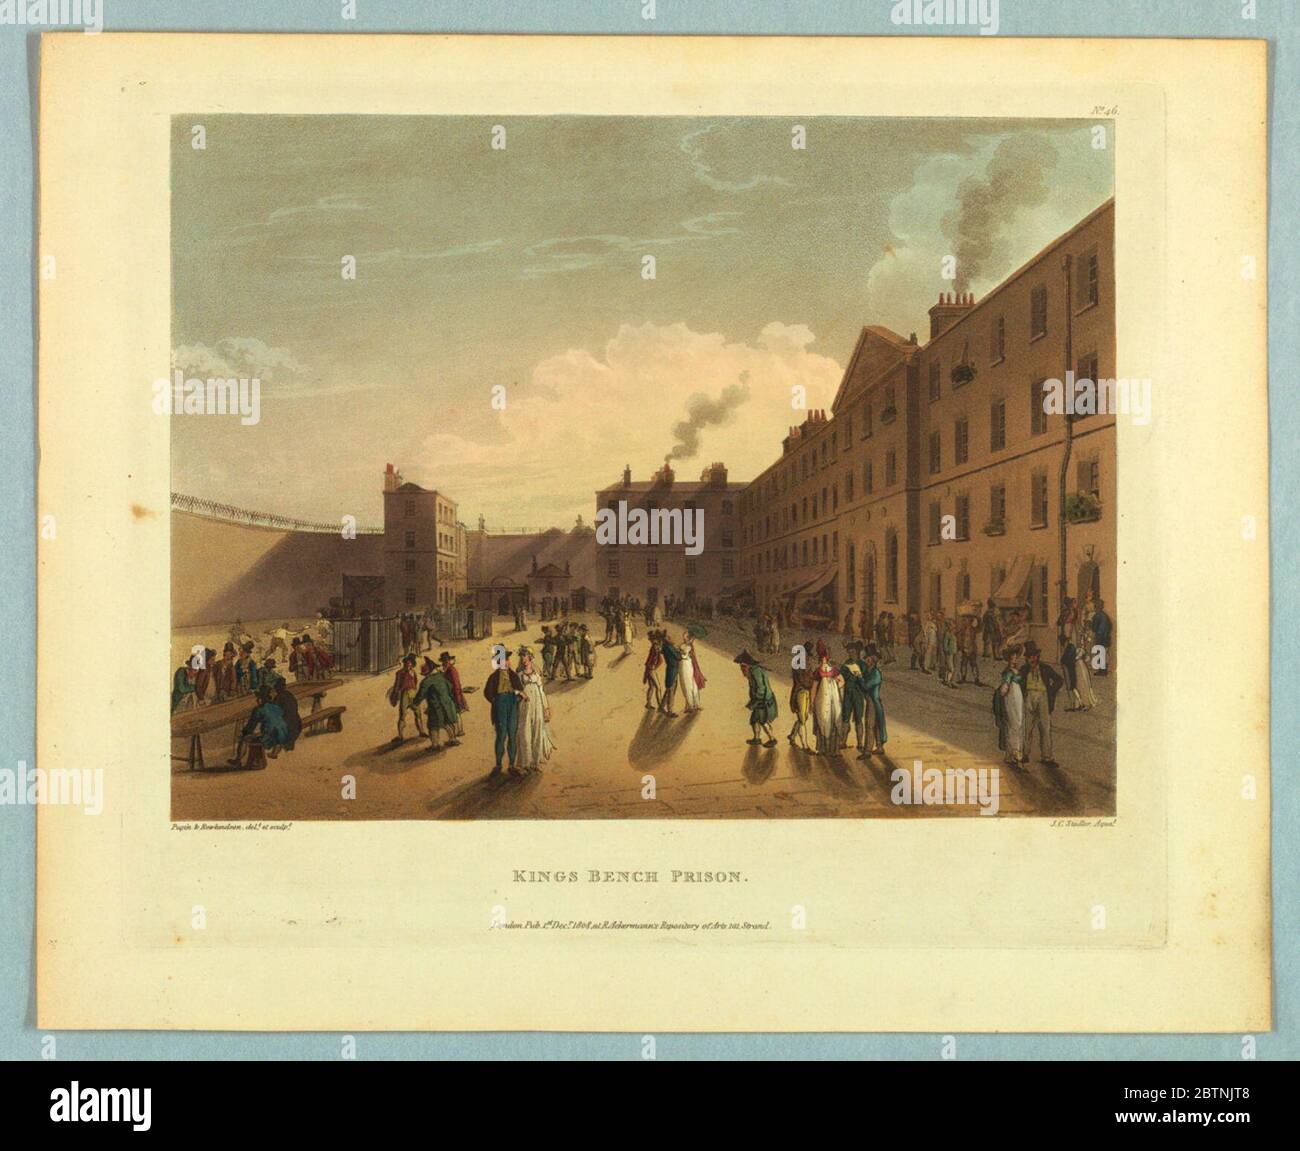 Kings Bench Prison from Ackermanns Repository. Research in ProgressWalled yard, running its length. Outer wall to the left; dormitories to the right. Men and women walk in the evening light. Title, artists', and publisher's names below. Stock Photo